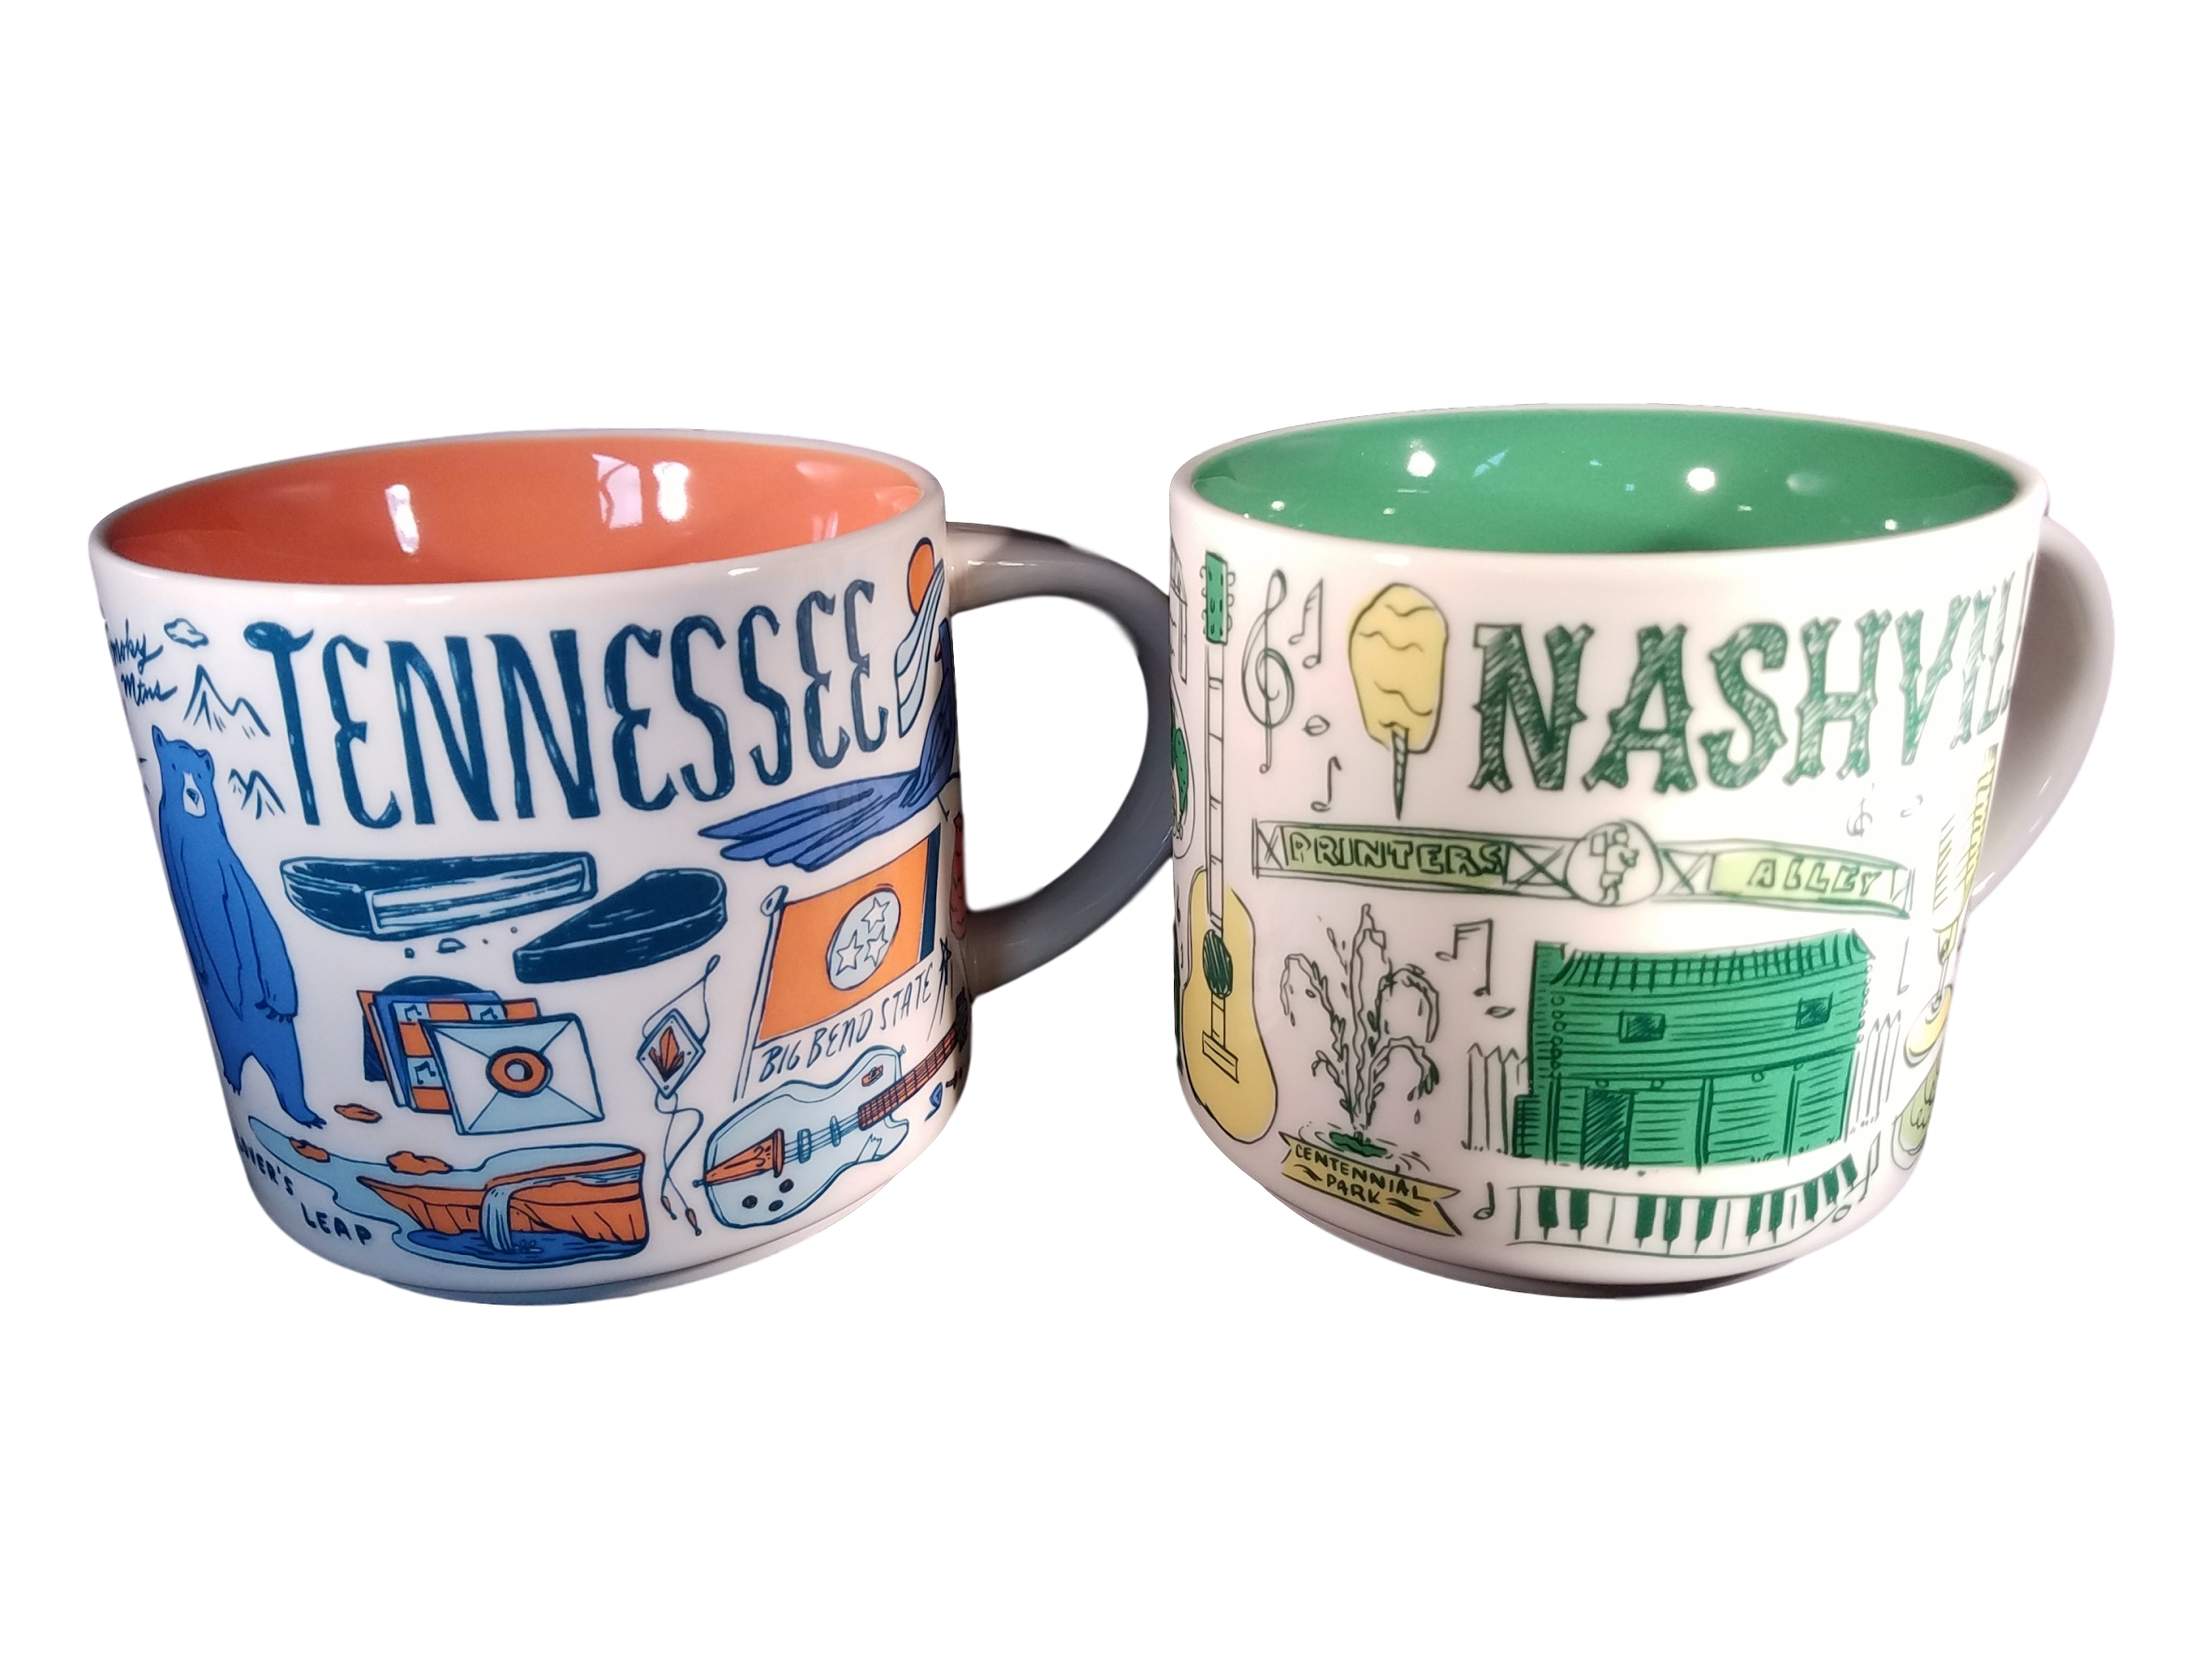 Starbucks Nashville and Tennessee Been There Series Ceramic Coffee Mug Set,  14 oz